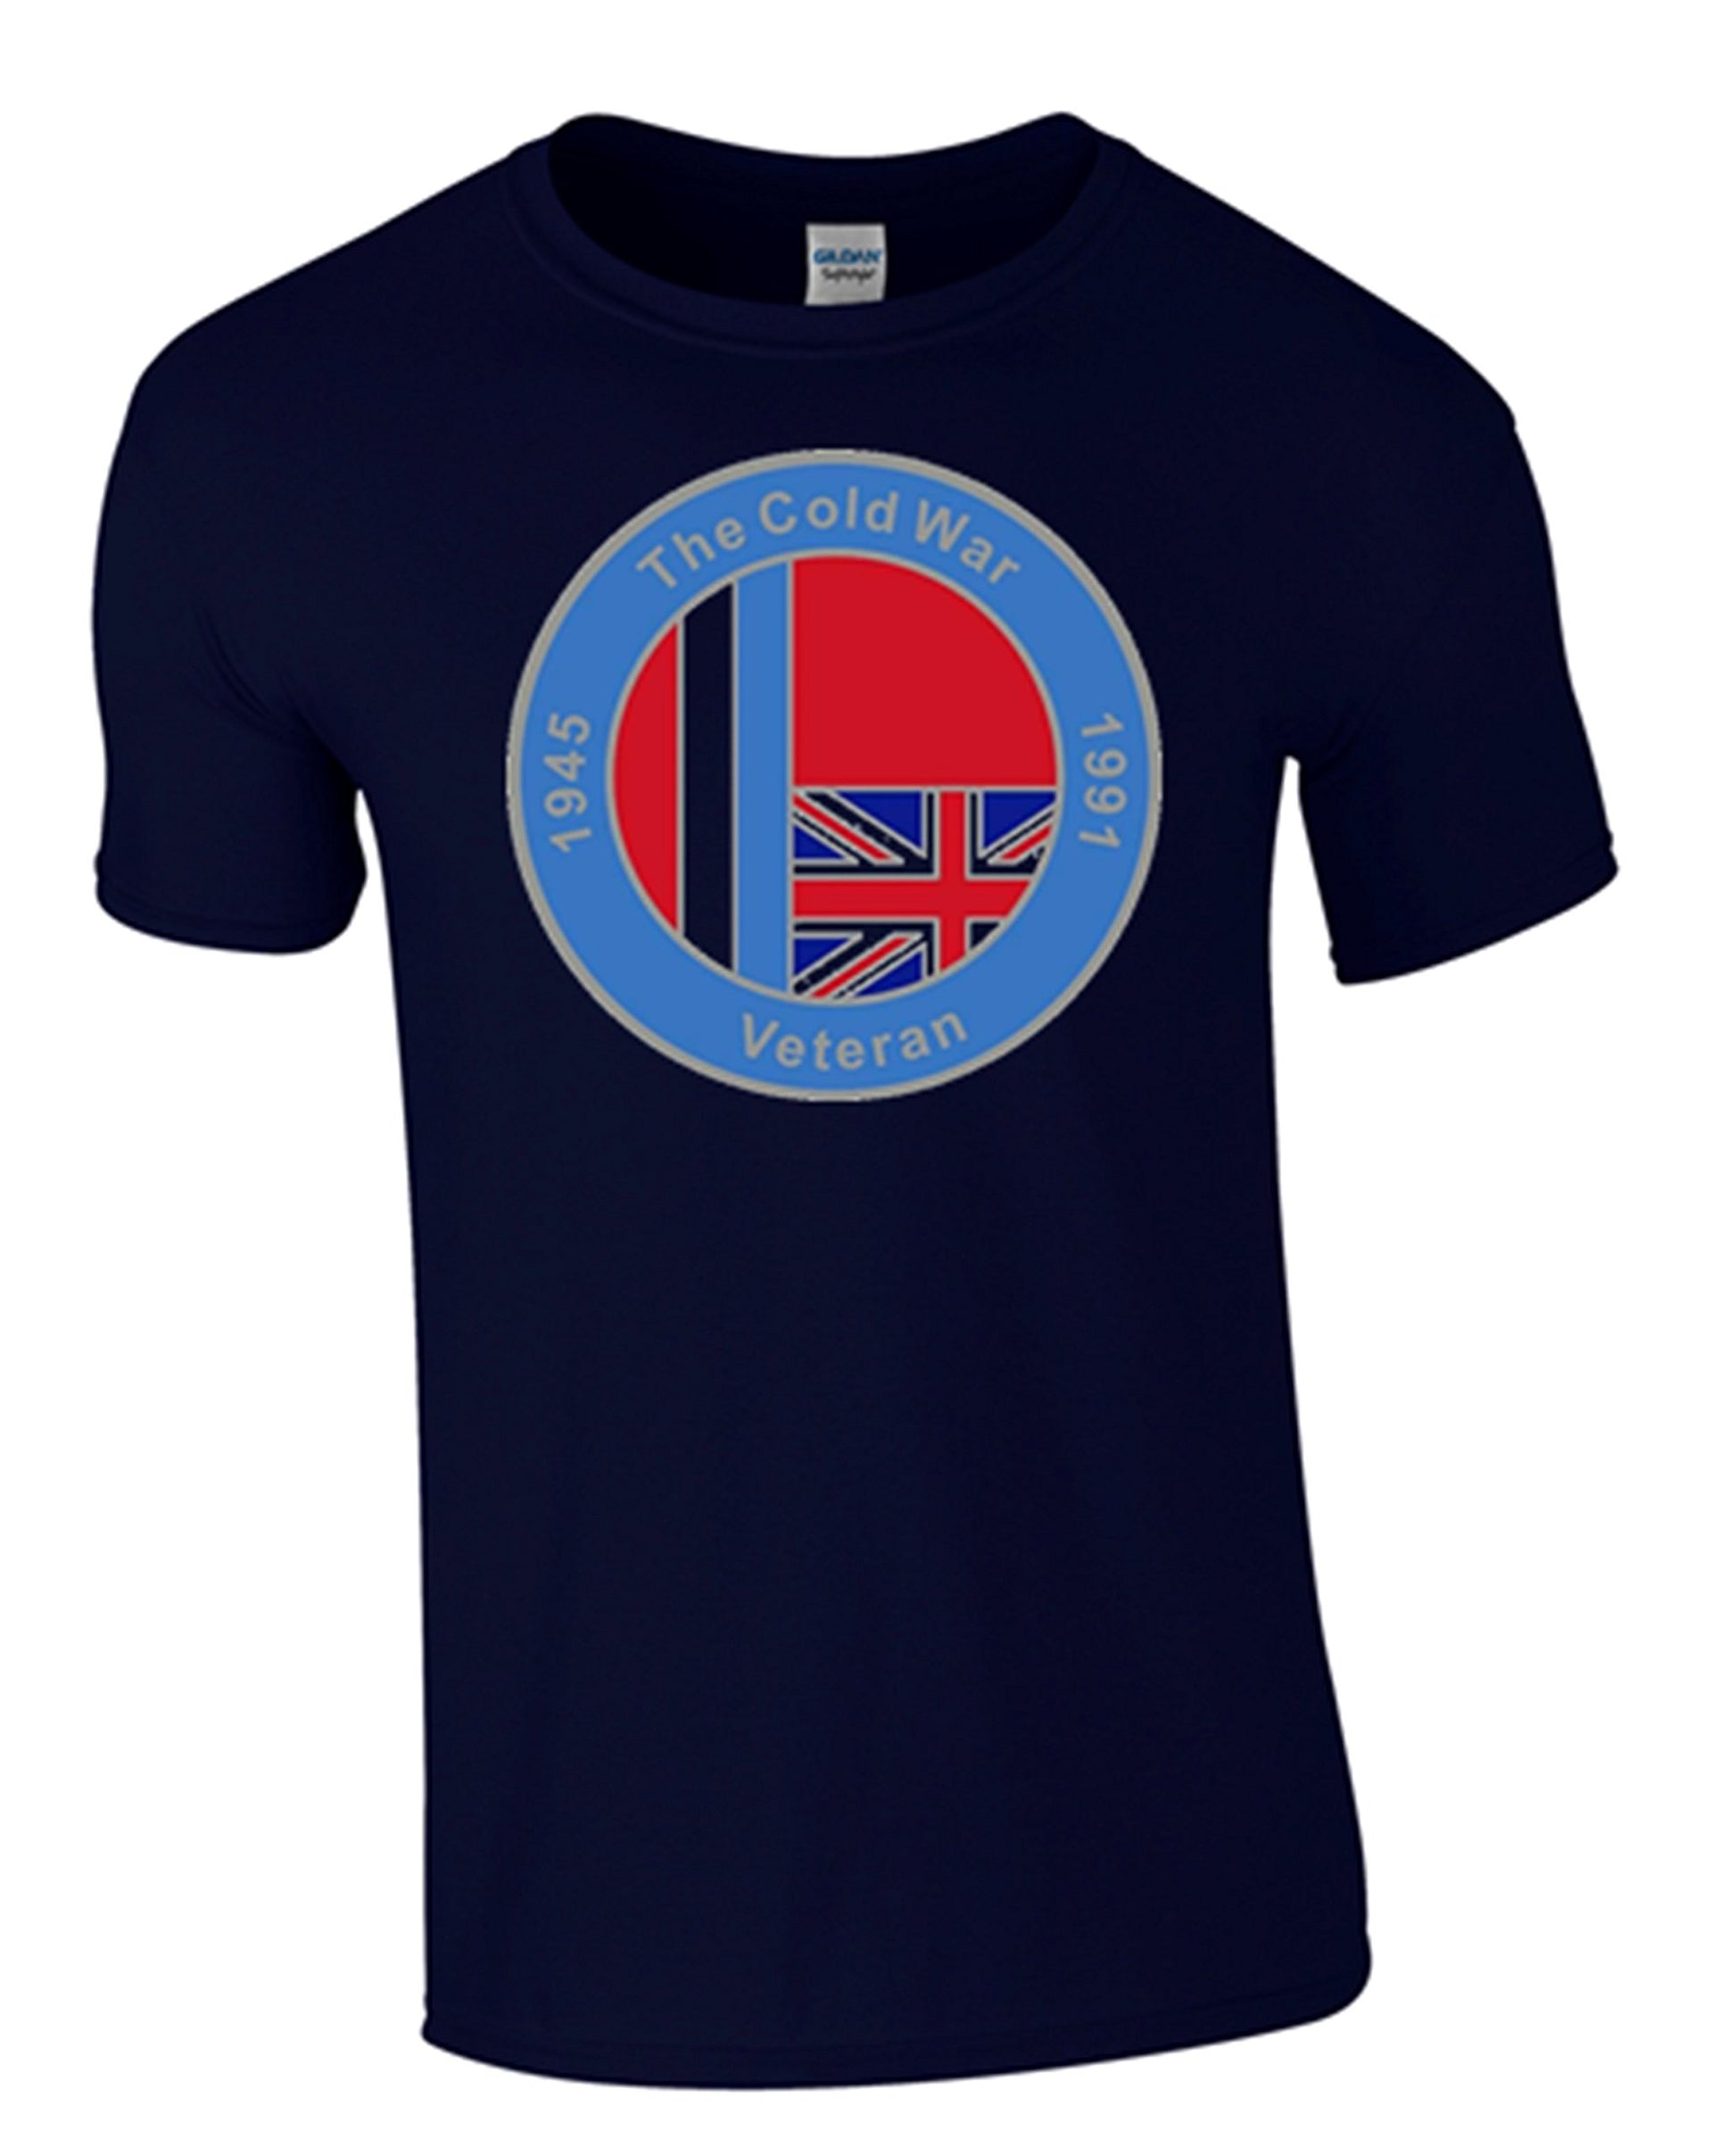 Bear Essentials Clothing. Cold War Op Banner T/Shirt (M, Blue) - Army 1157 kit Army 1157 Kit